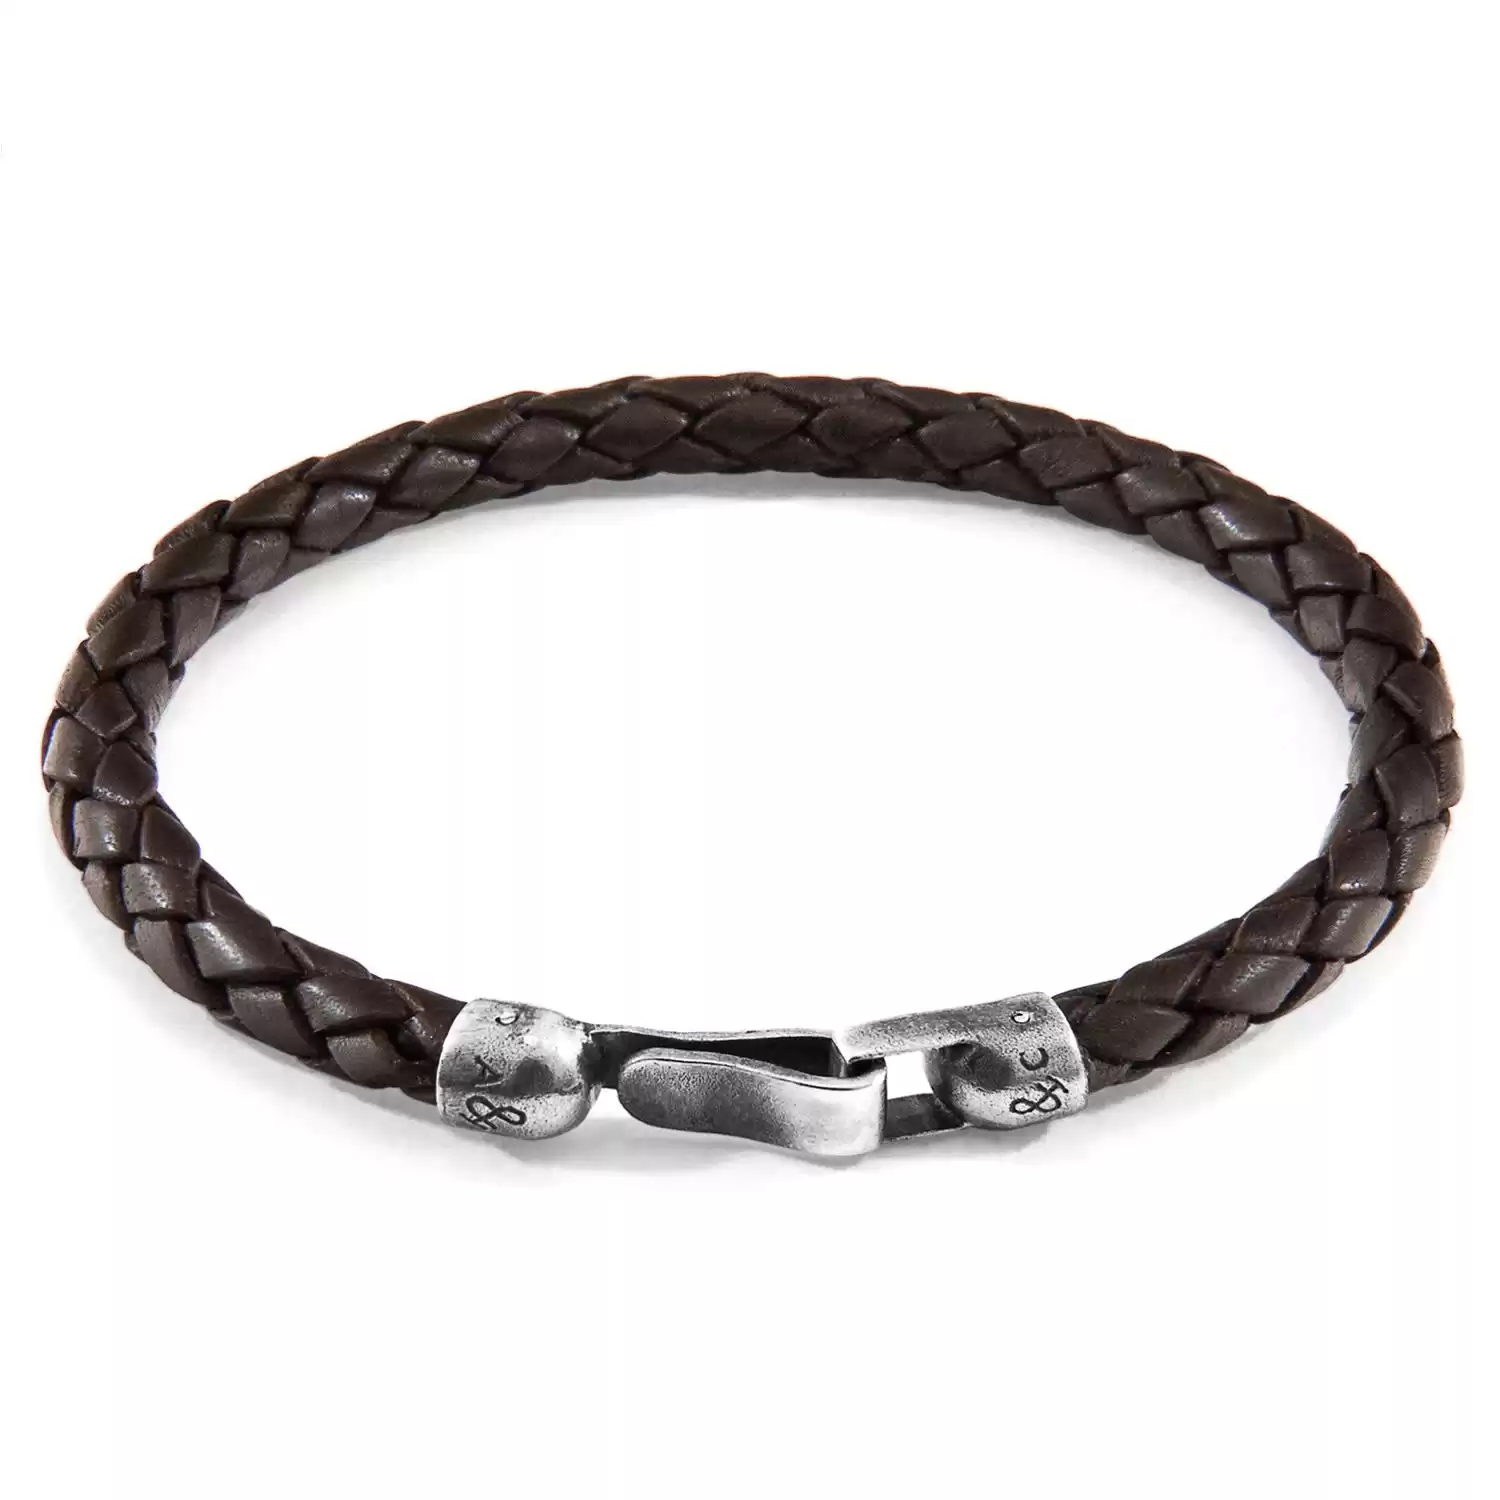 Cacao Brown Skye Silver & Braided Leather Bracelet